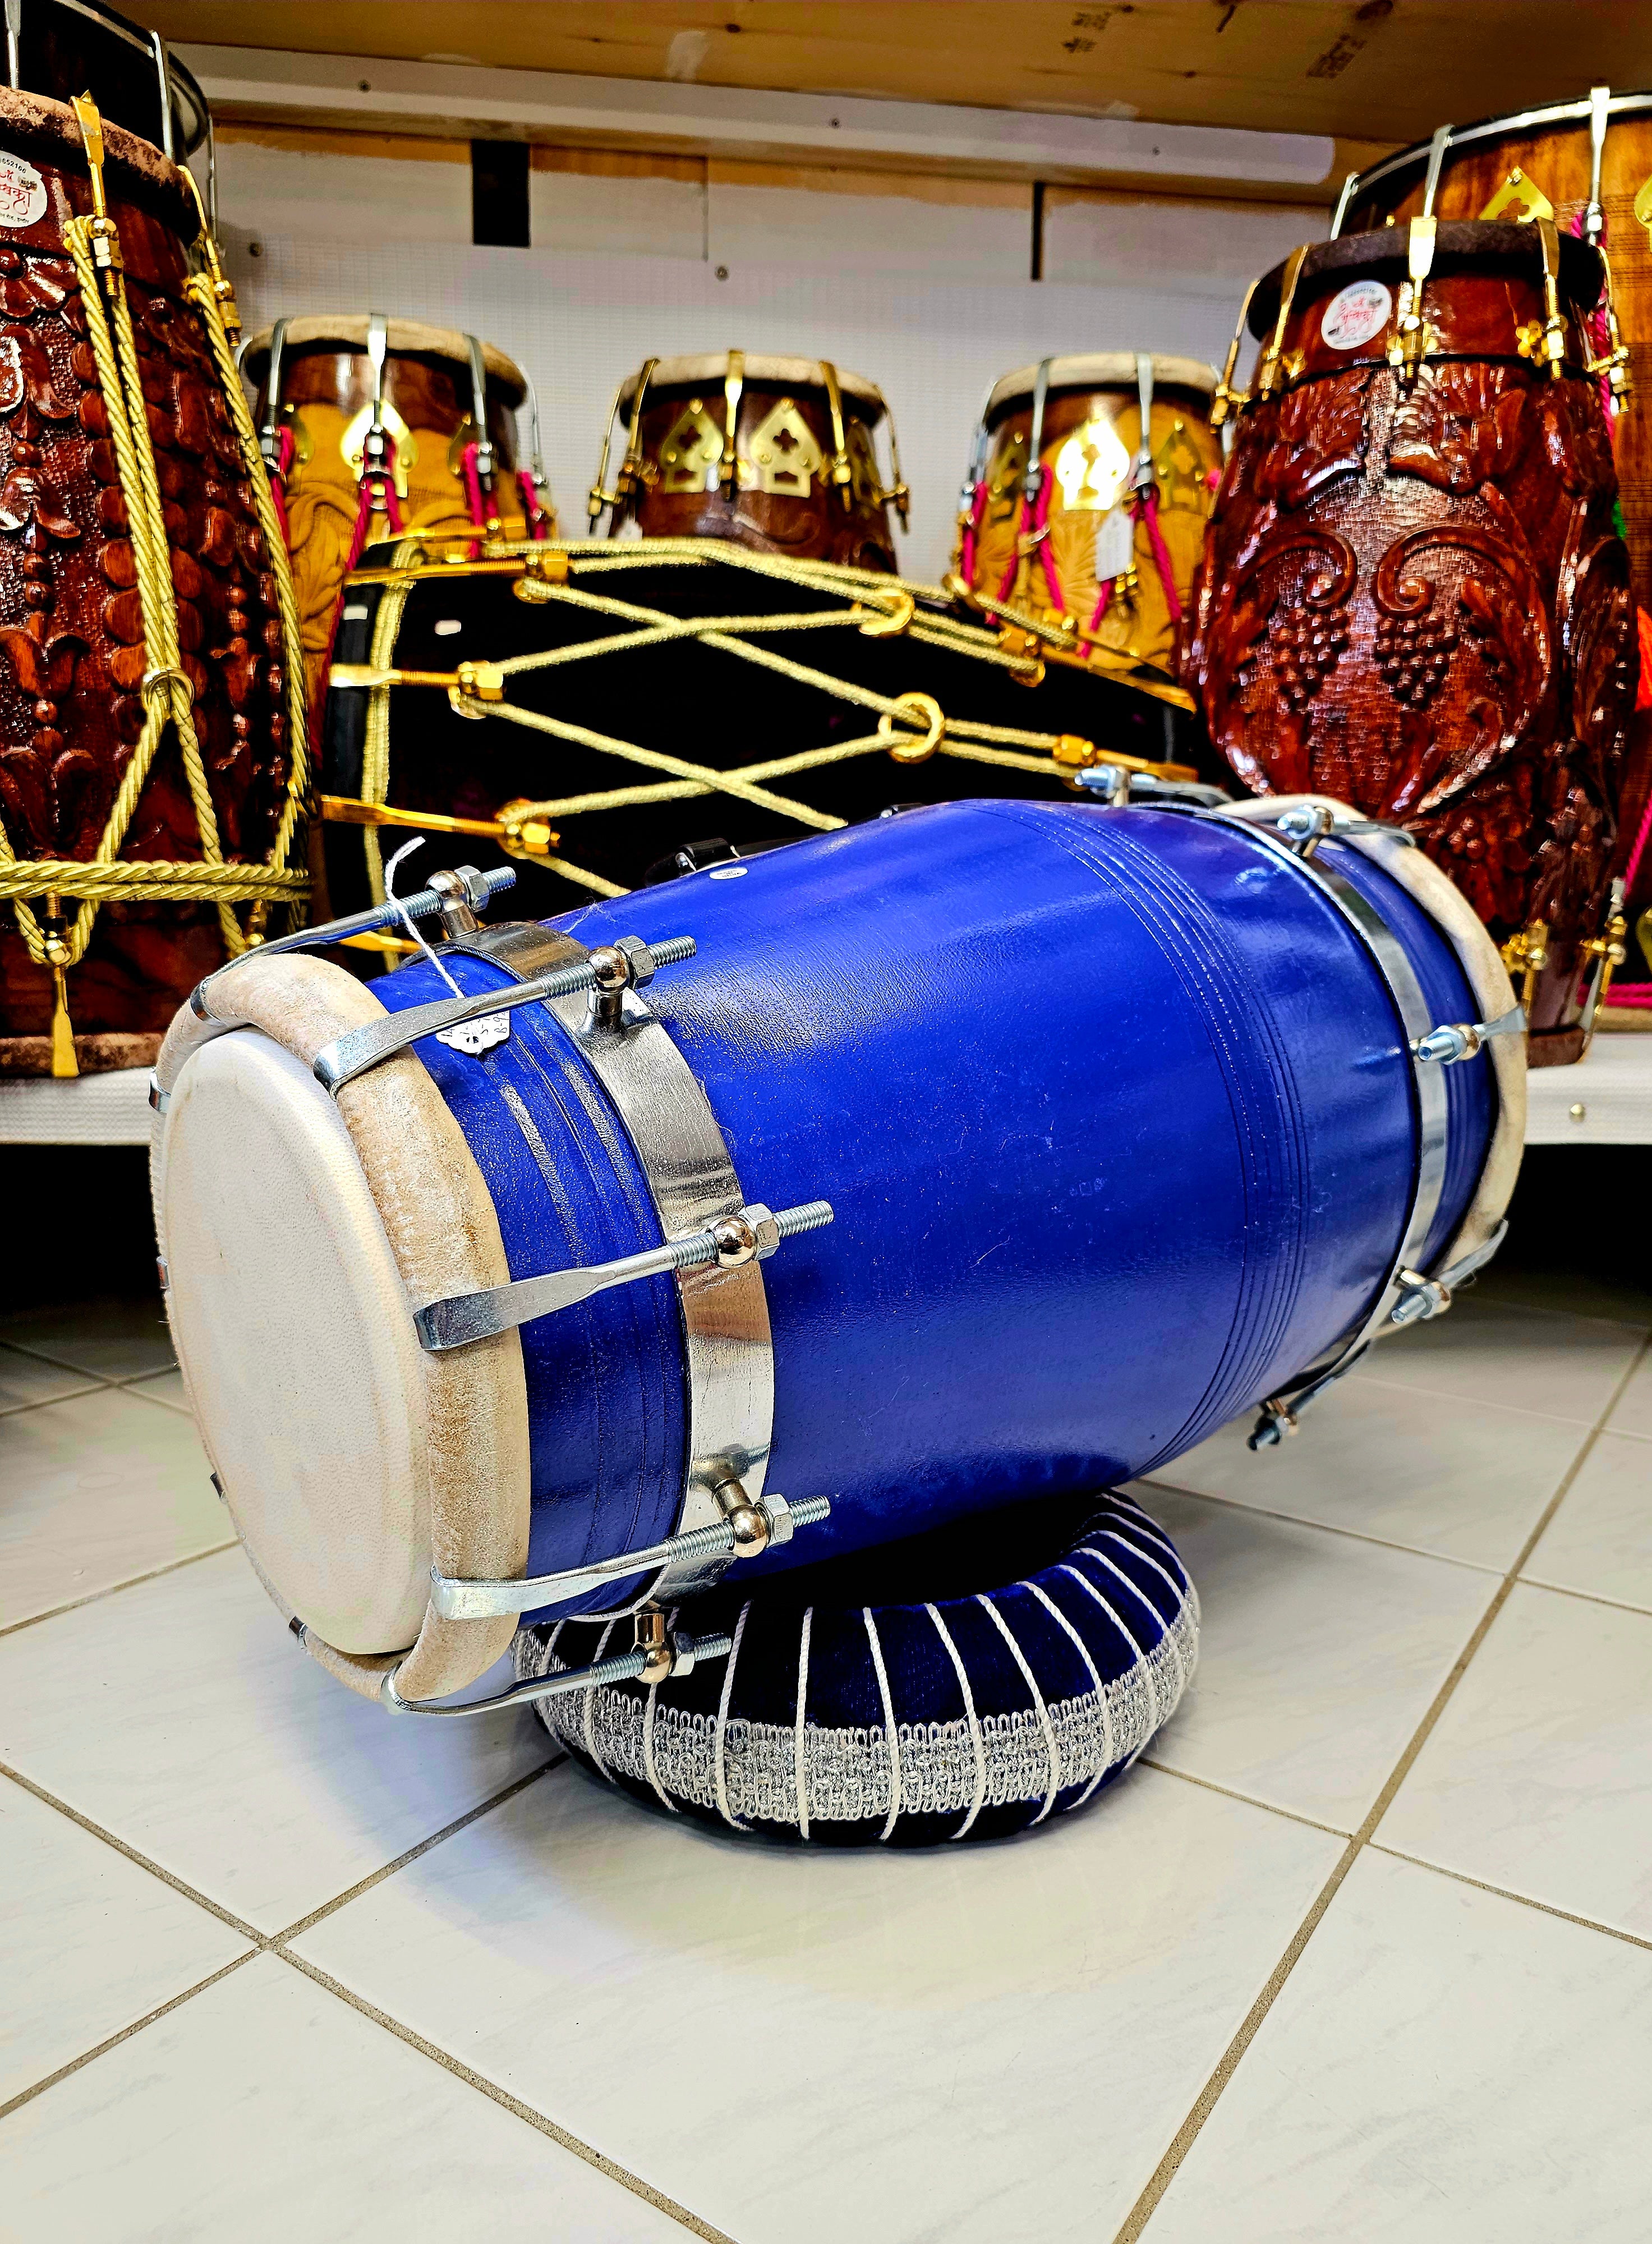 The Sapphire Symphony Dholak - A Professional Blue Mango Wood Dholak with Chrome Bolts, Metal Rings and a Handle!